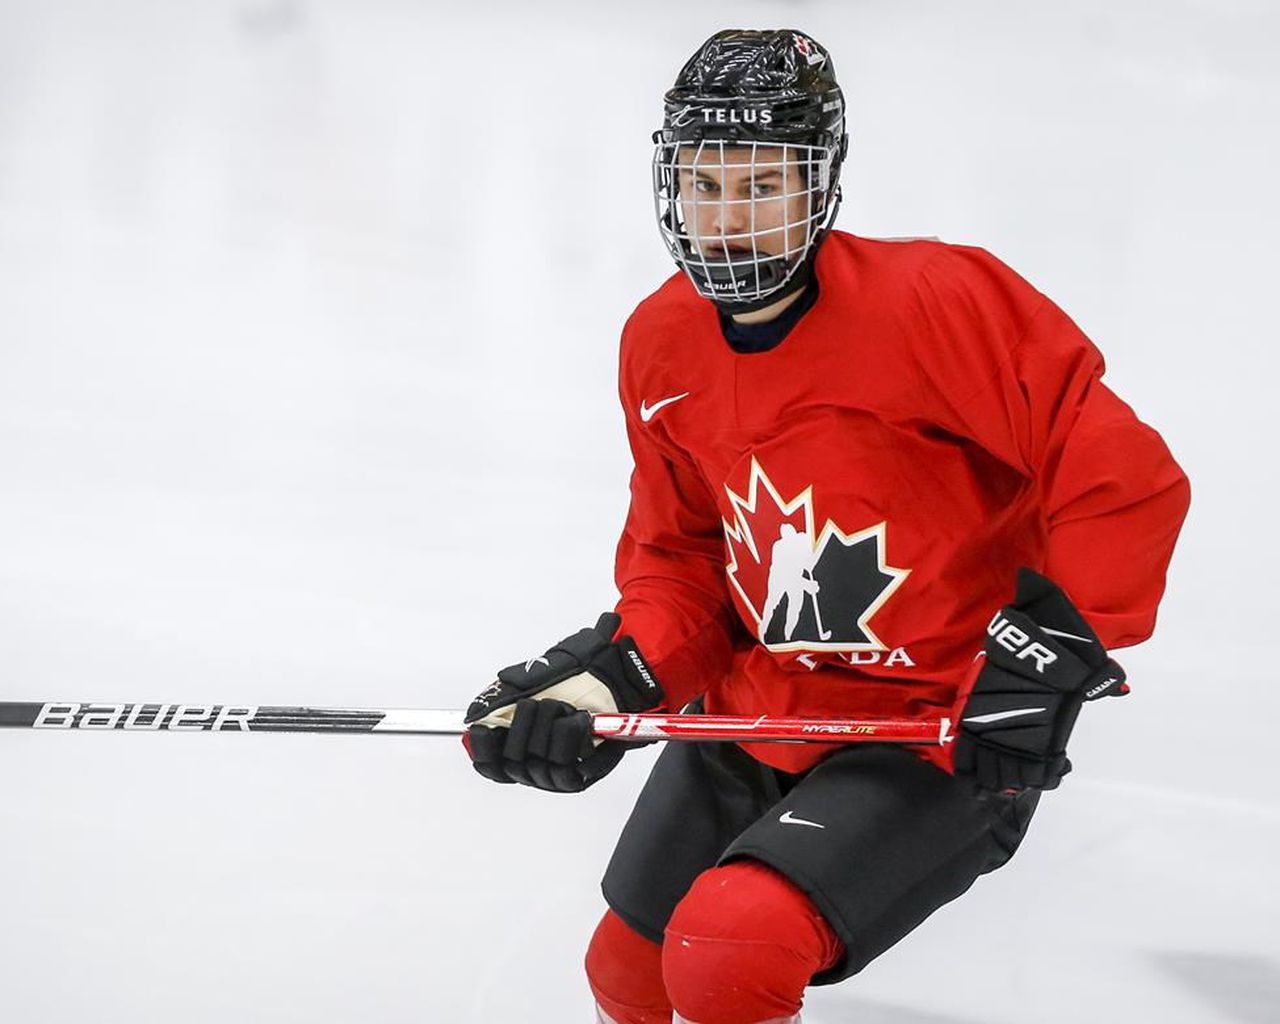 Bedard aims to join Gretzky, Crosby in playing for Canadian junior hockey team at 16